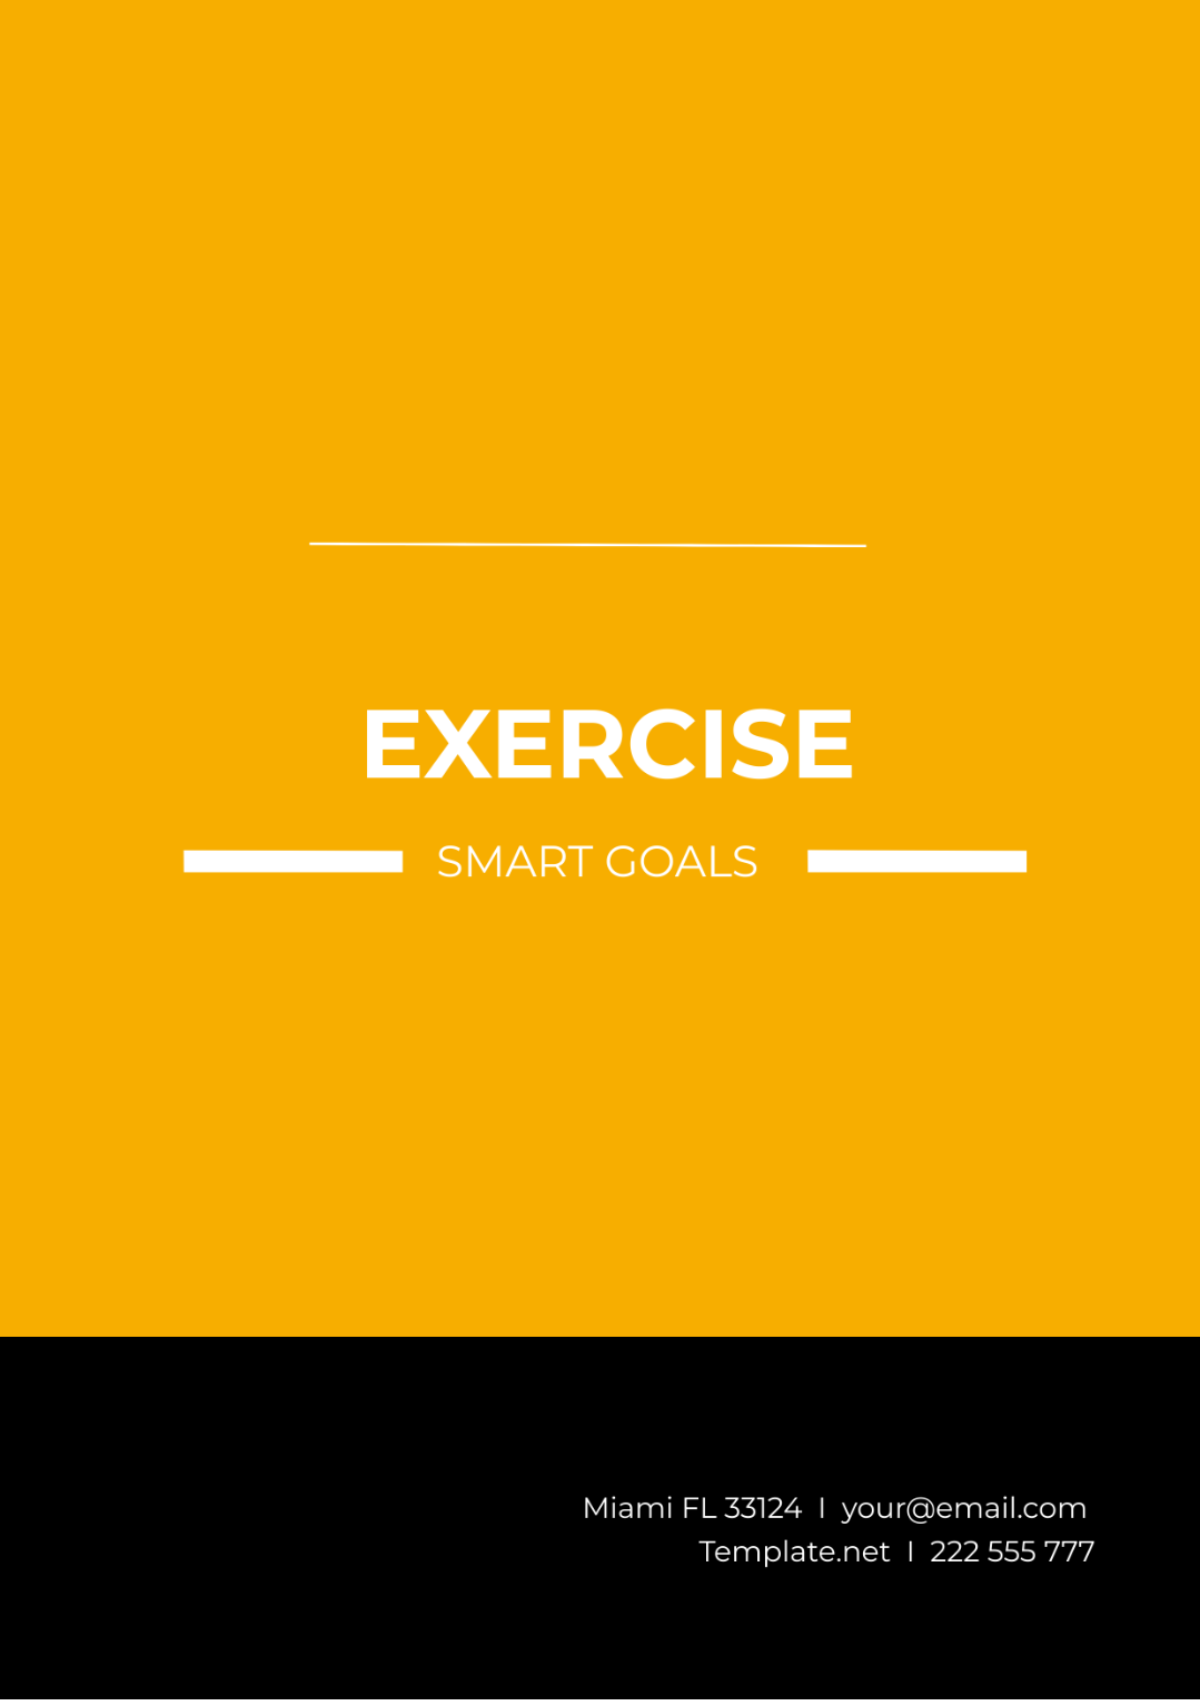 Exercise SMART Goals Template